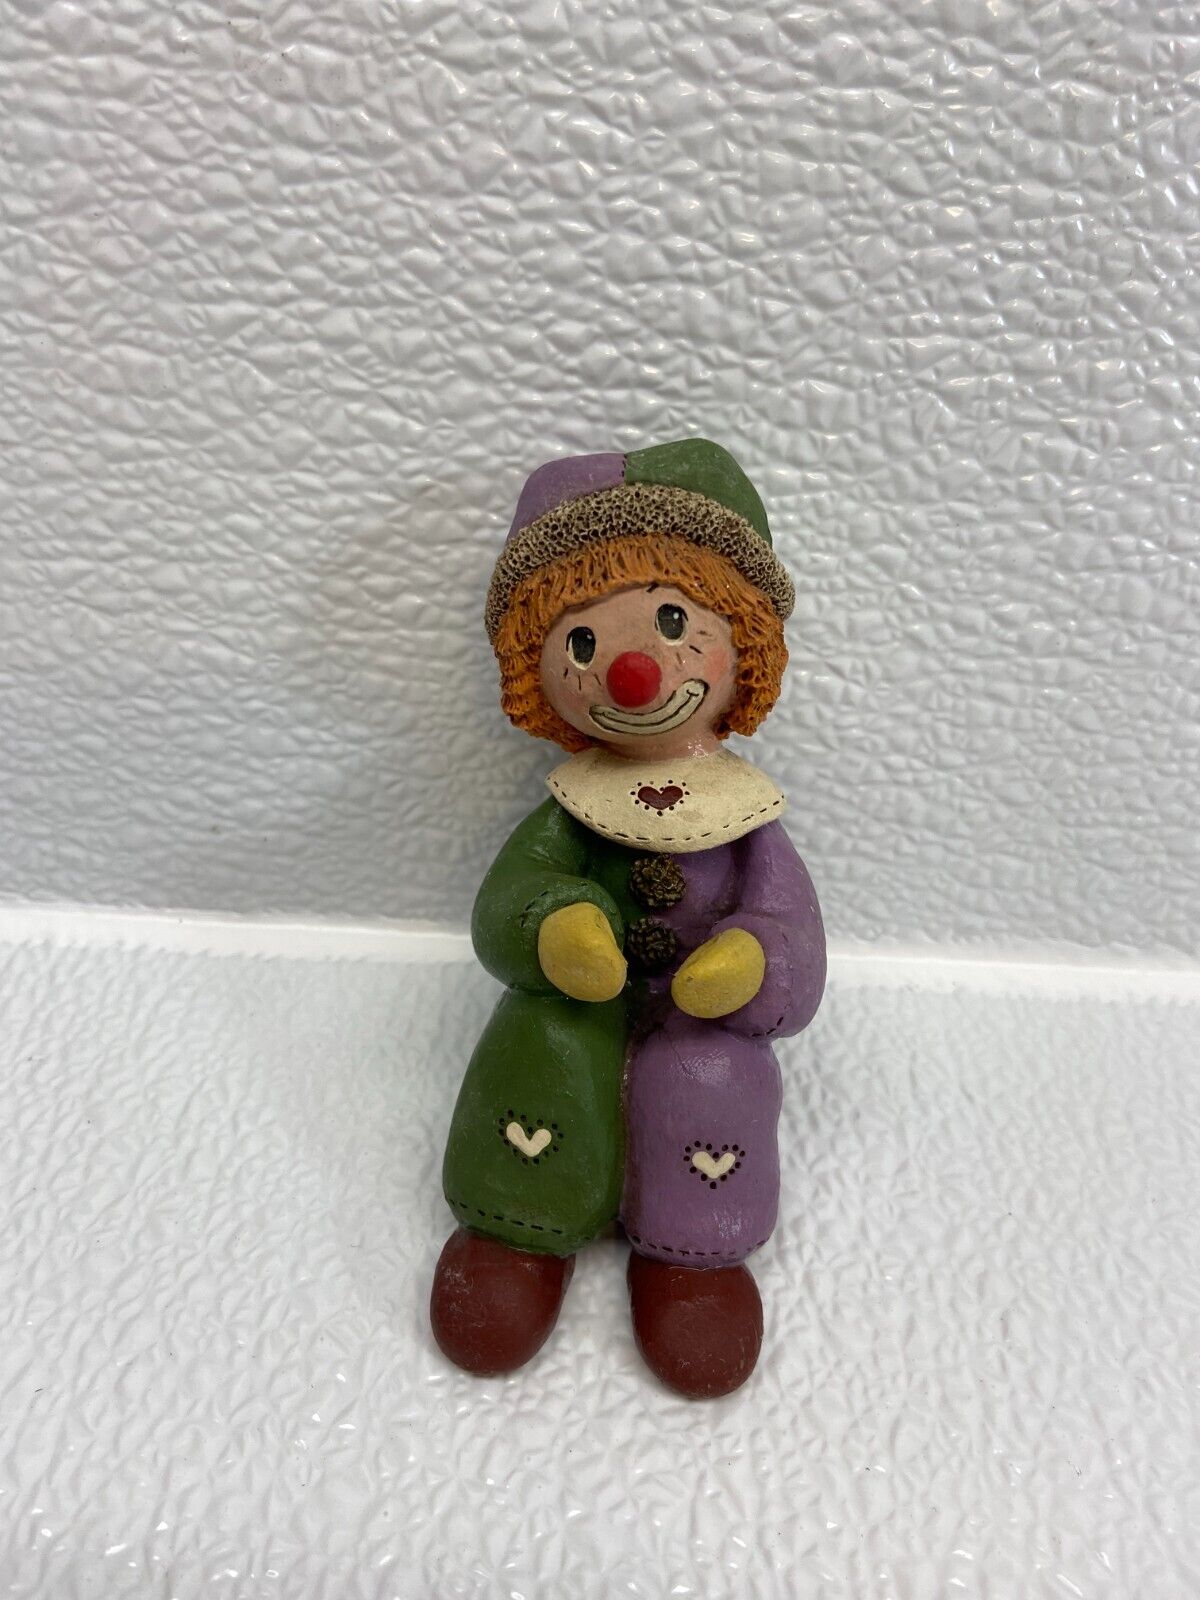 Vintage 1994 Ceramic Hand Made And Painted Seatting Clown Home Decor Figurine